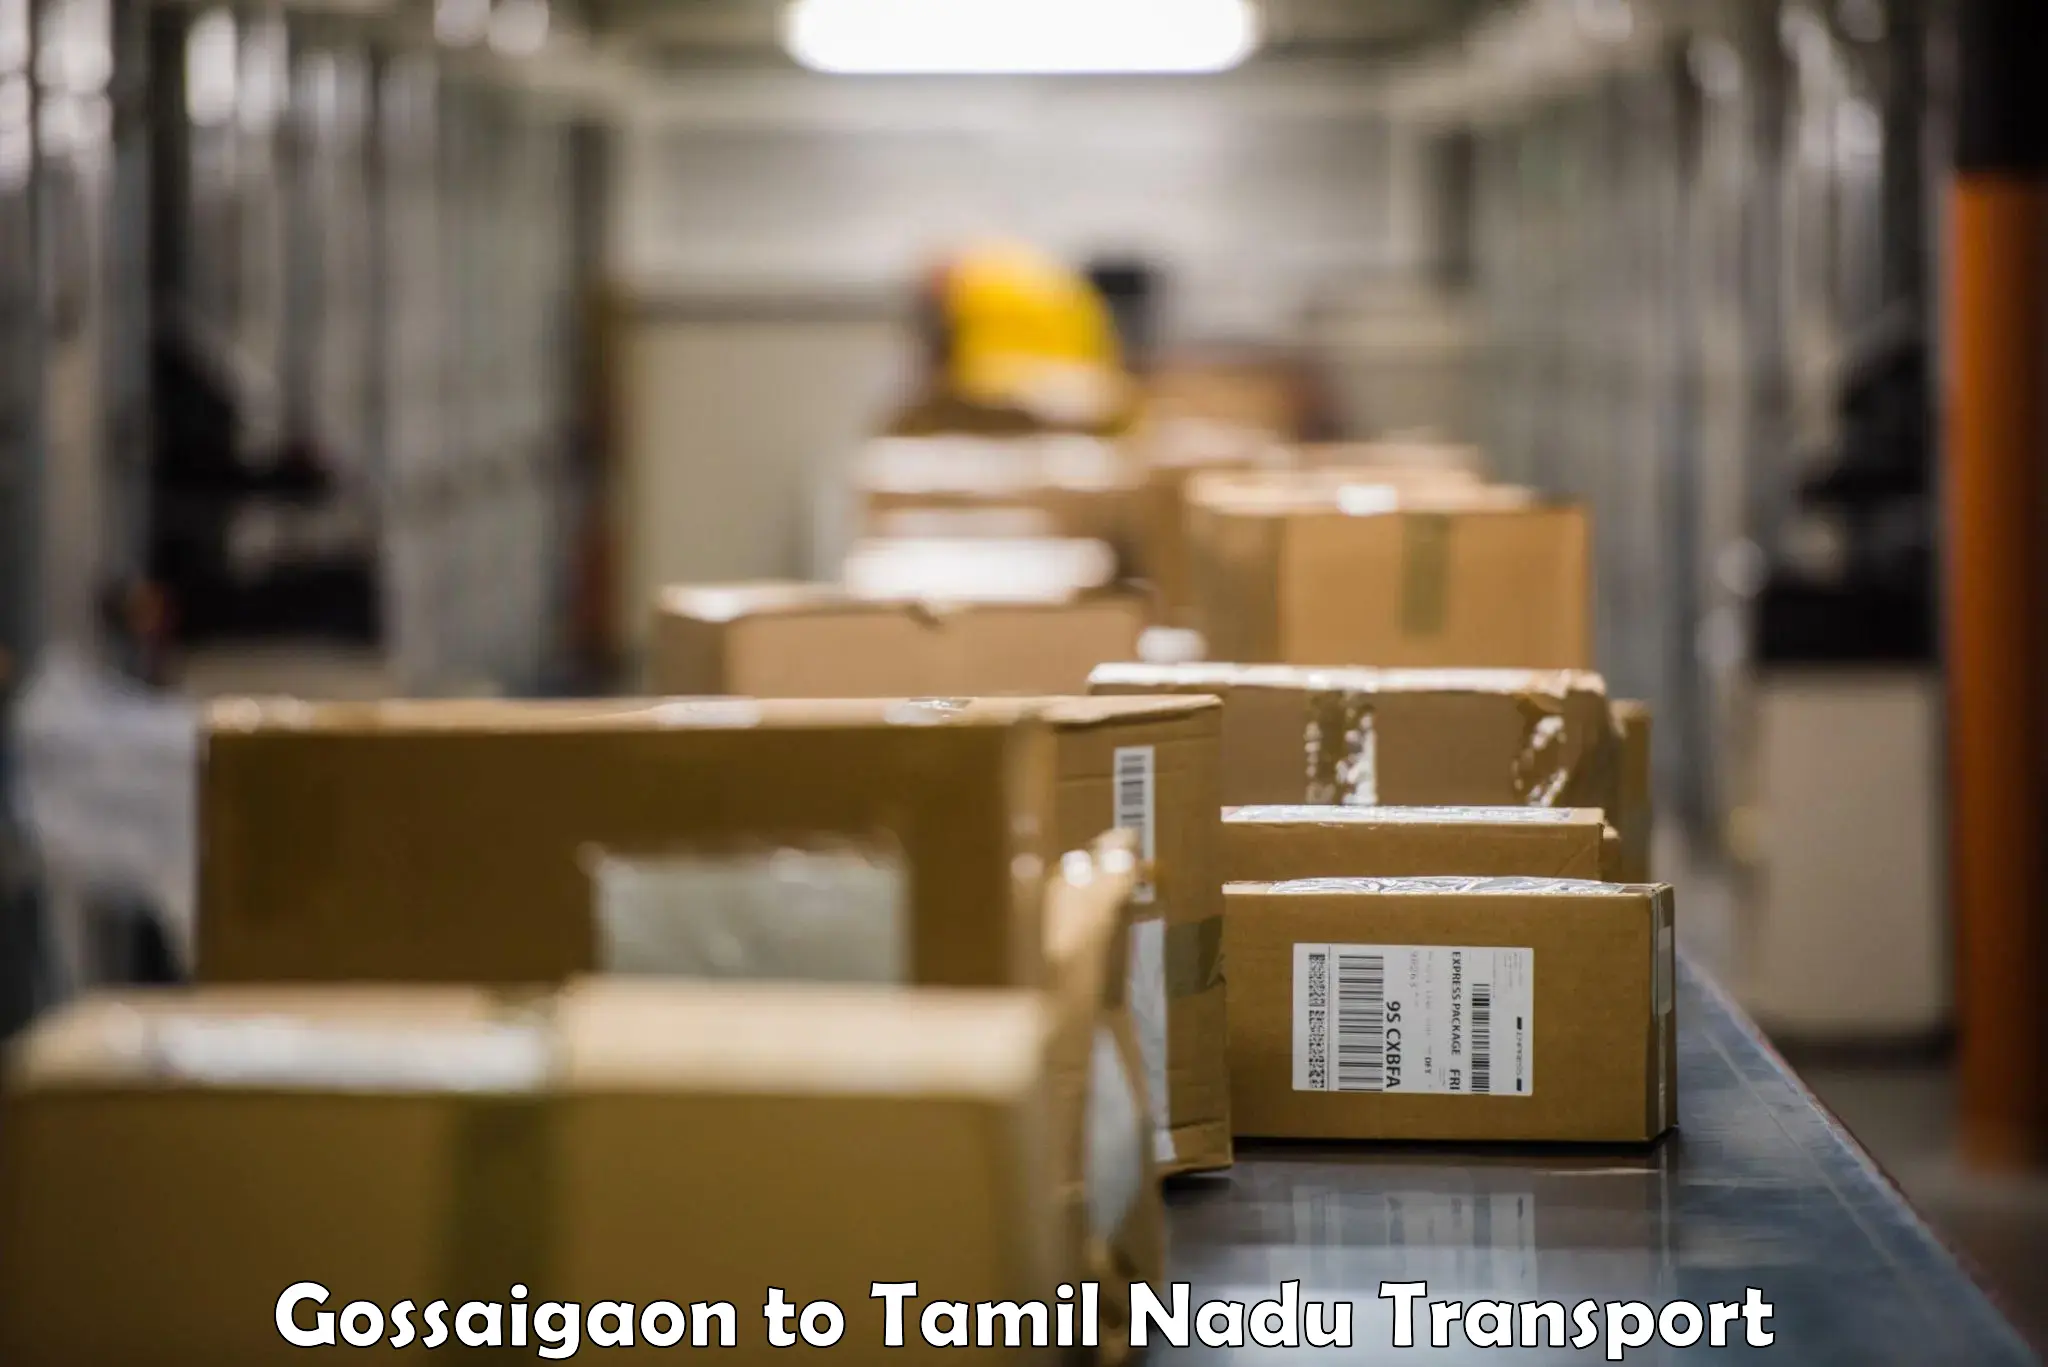 Cycle transportation service Gossaigaon to Ennore Port Chennai